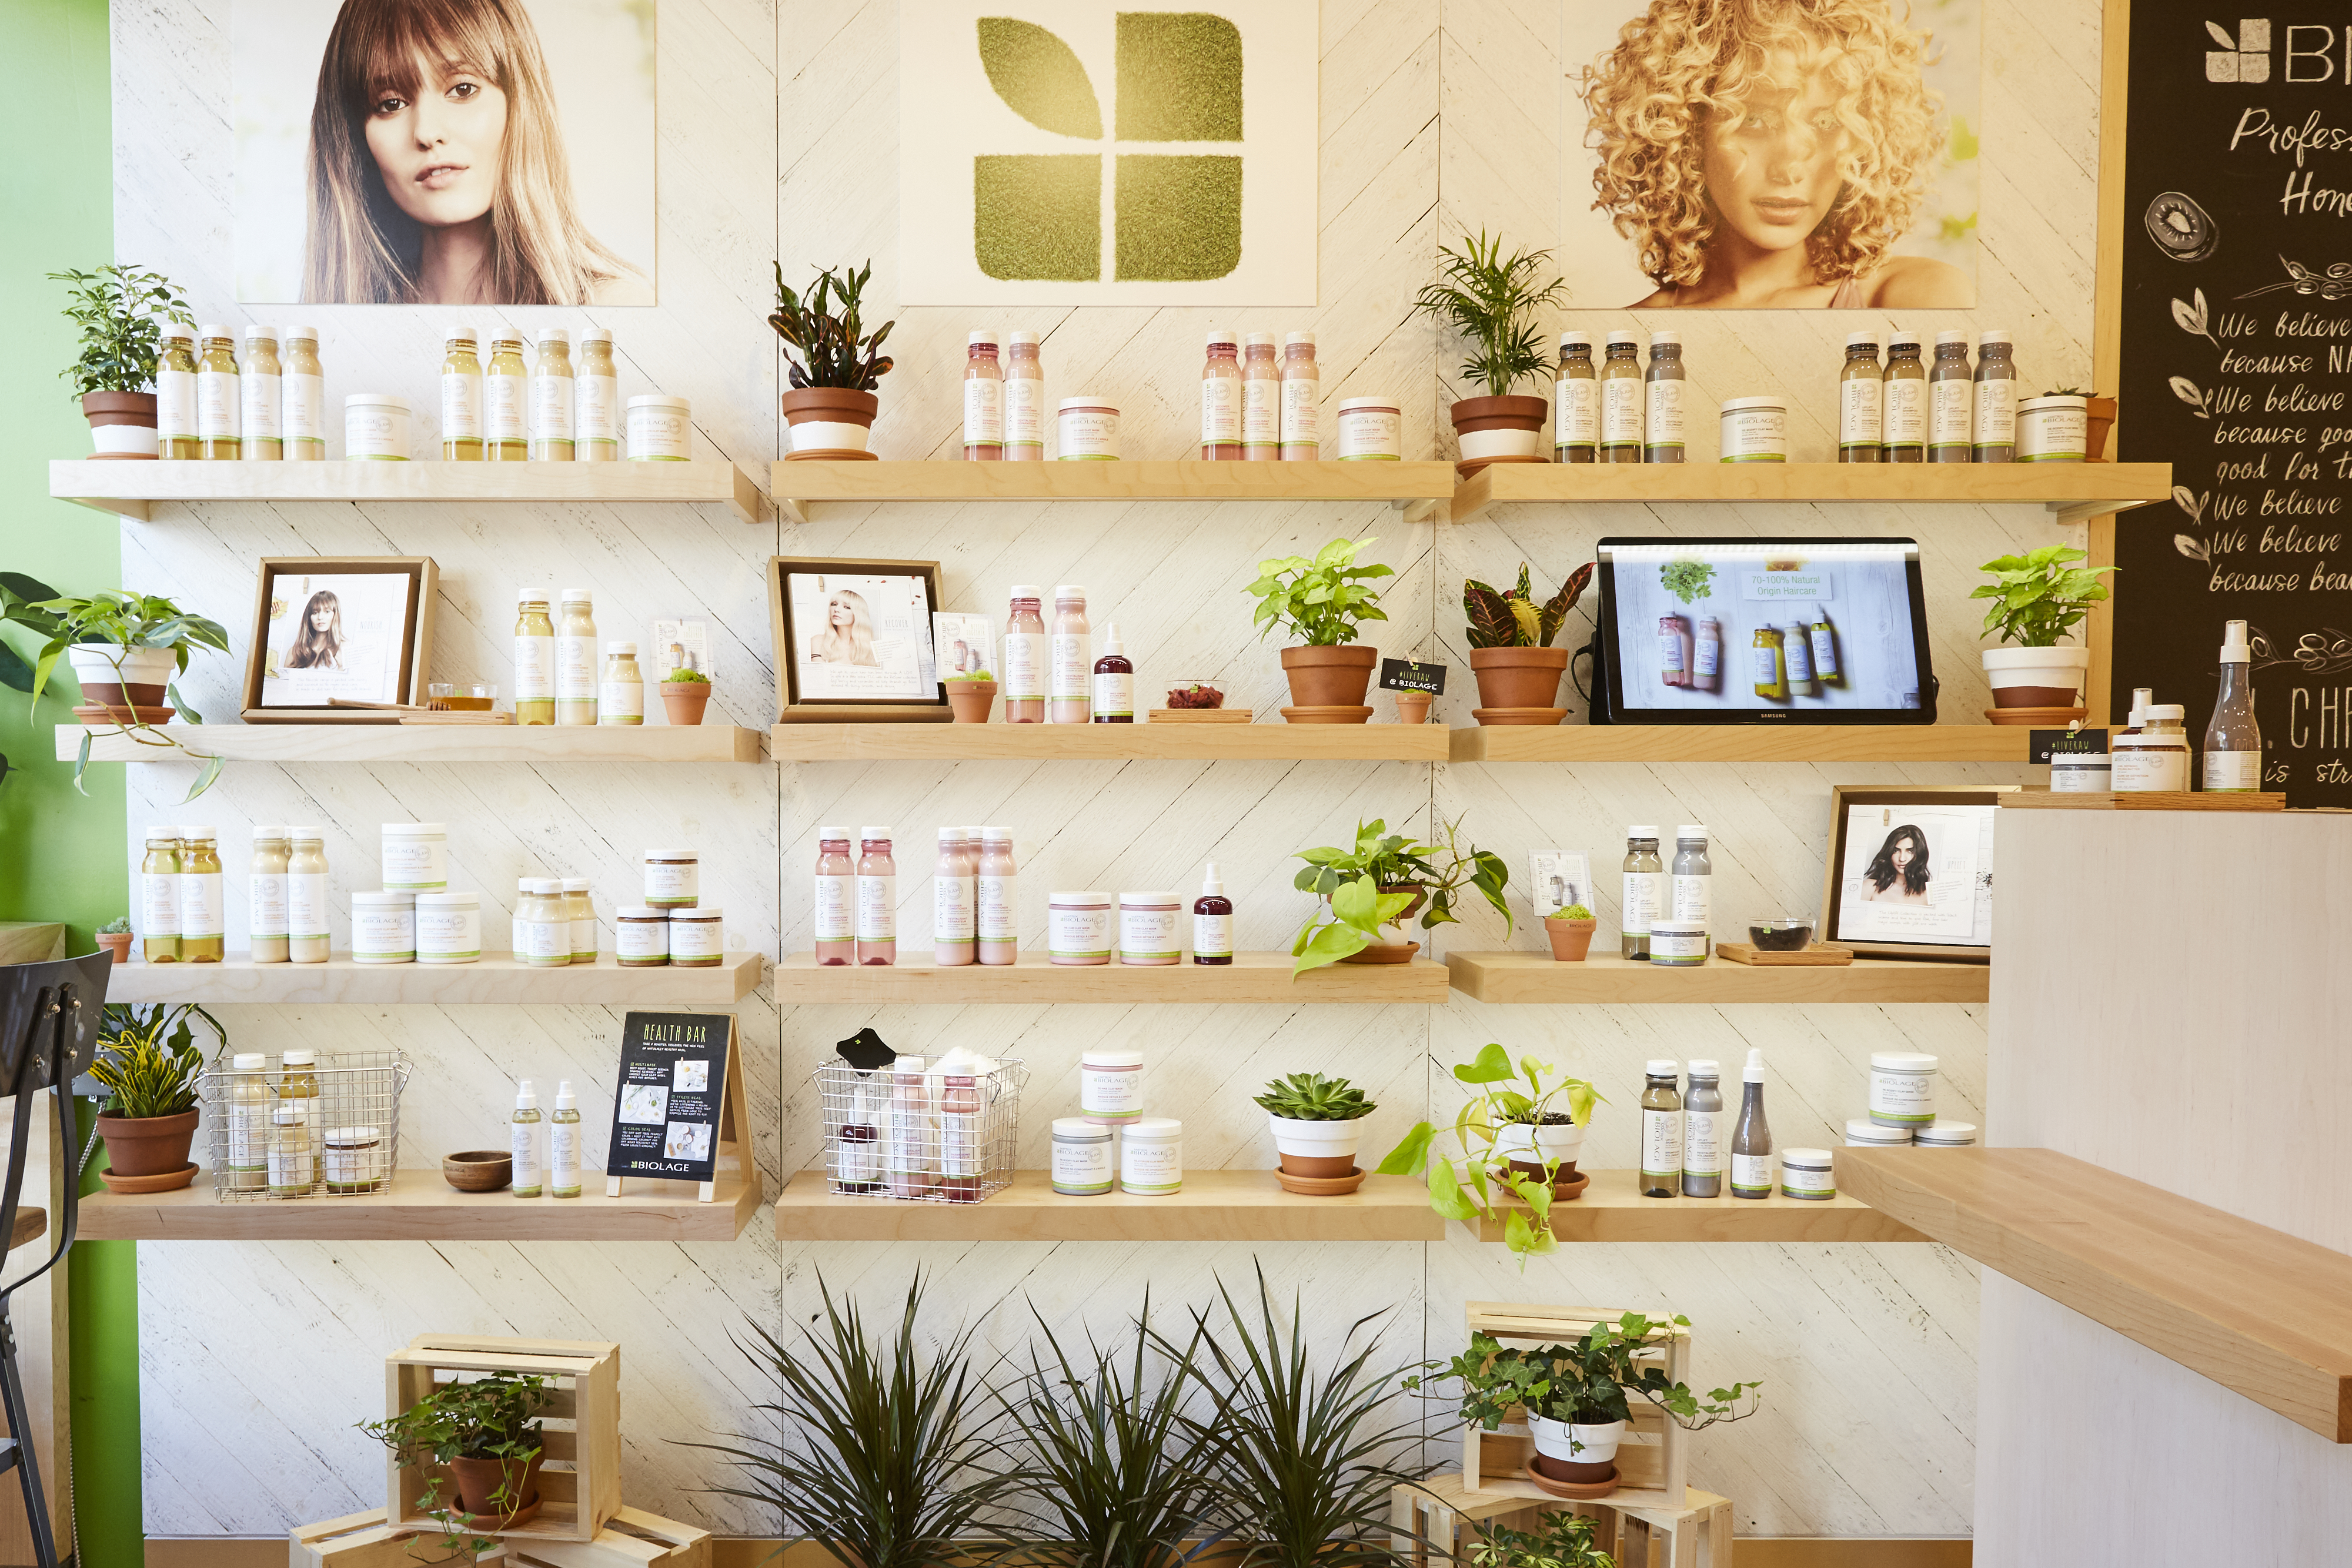 Biolage Celebrates Earth Month With 30 Years Of Good